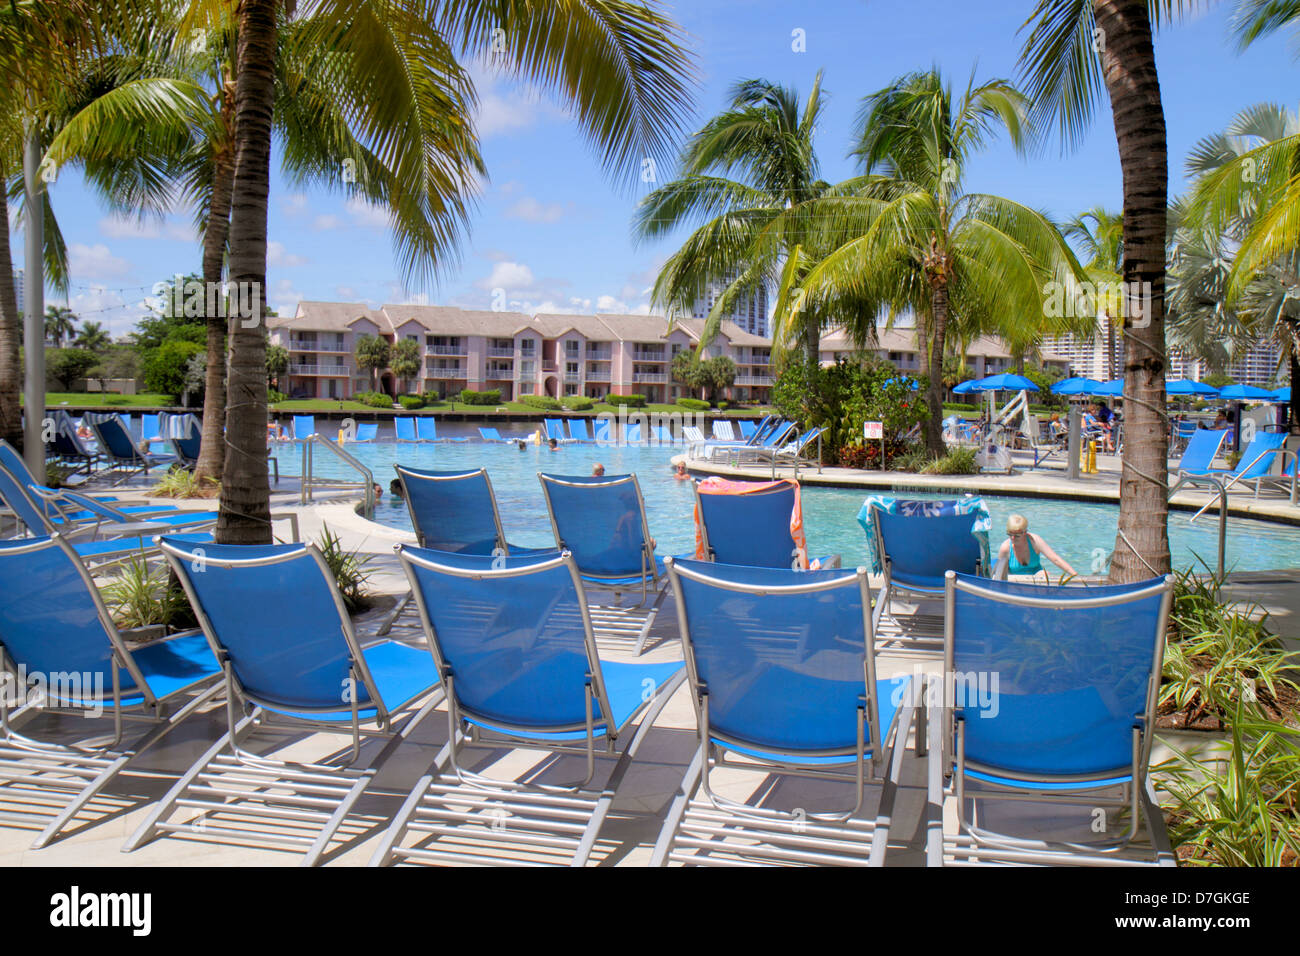 Hollywood Florida,water,Crowne Plaza Hollywood Beach,hotel,swimming pool area,palm trees,lounge chairs,FL120929120 Stock Photo